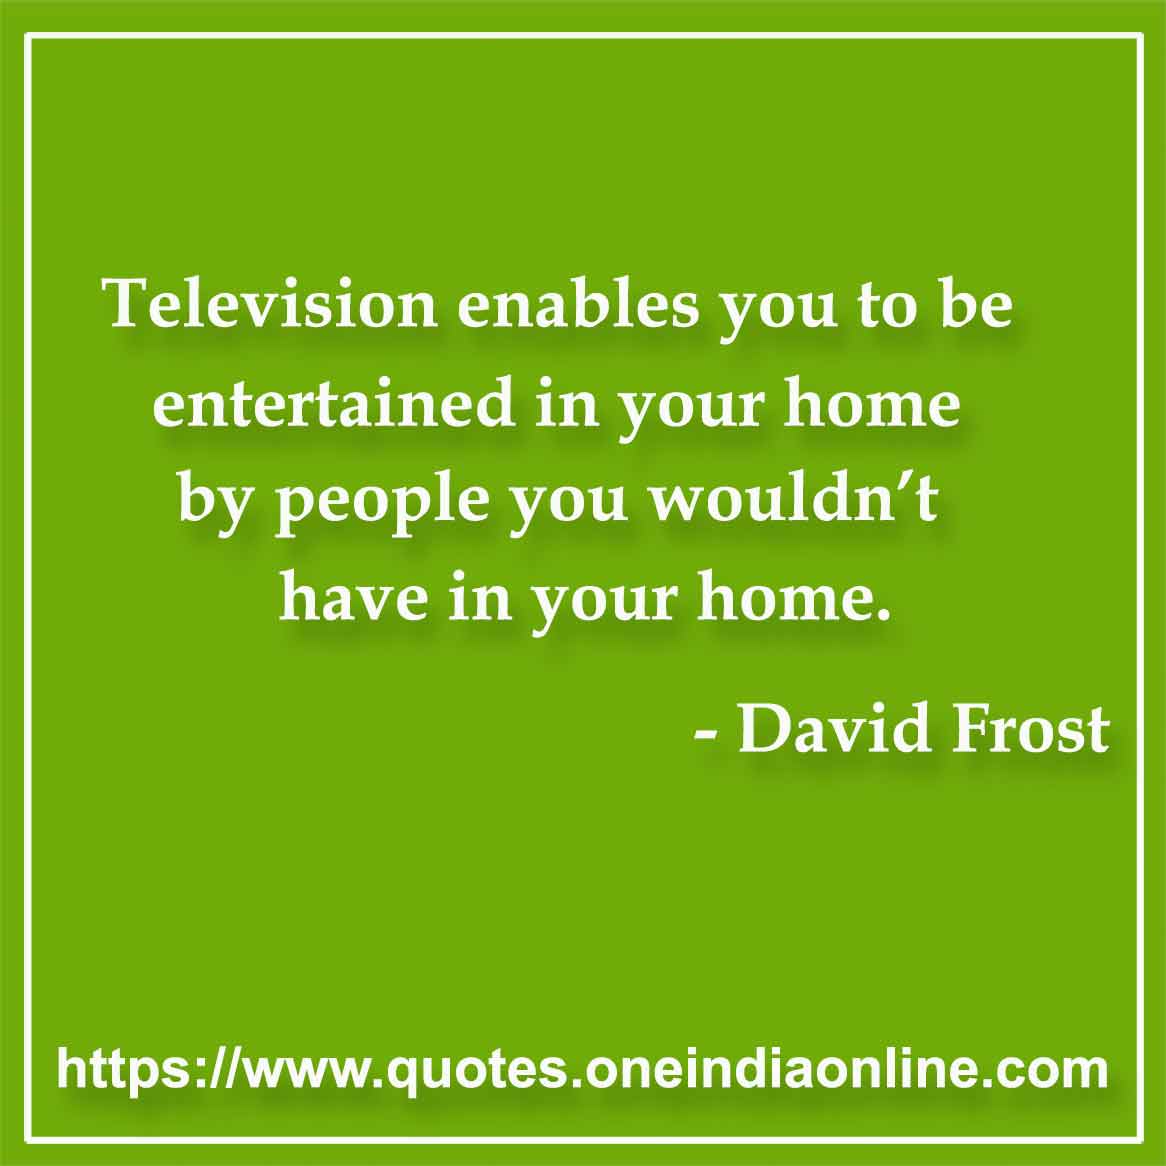 Television enables you to be entertained in your home by people you wouldn’t have in your home.

- David Frost Quotes